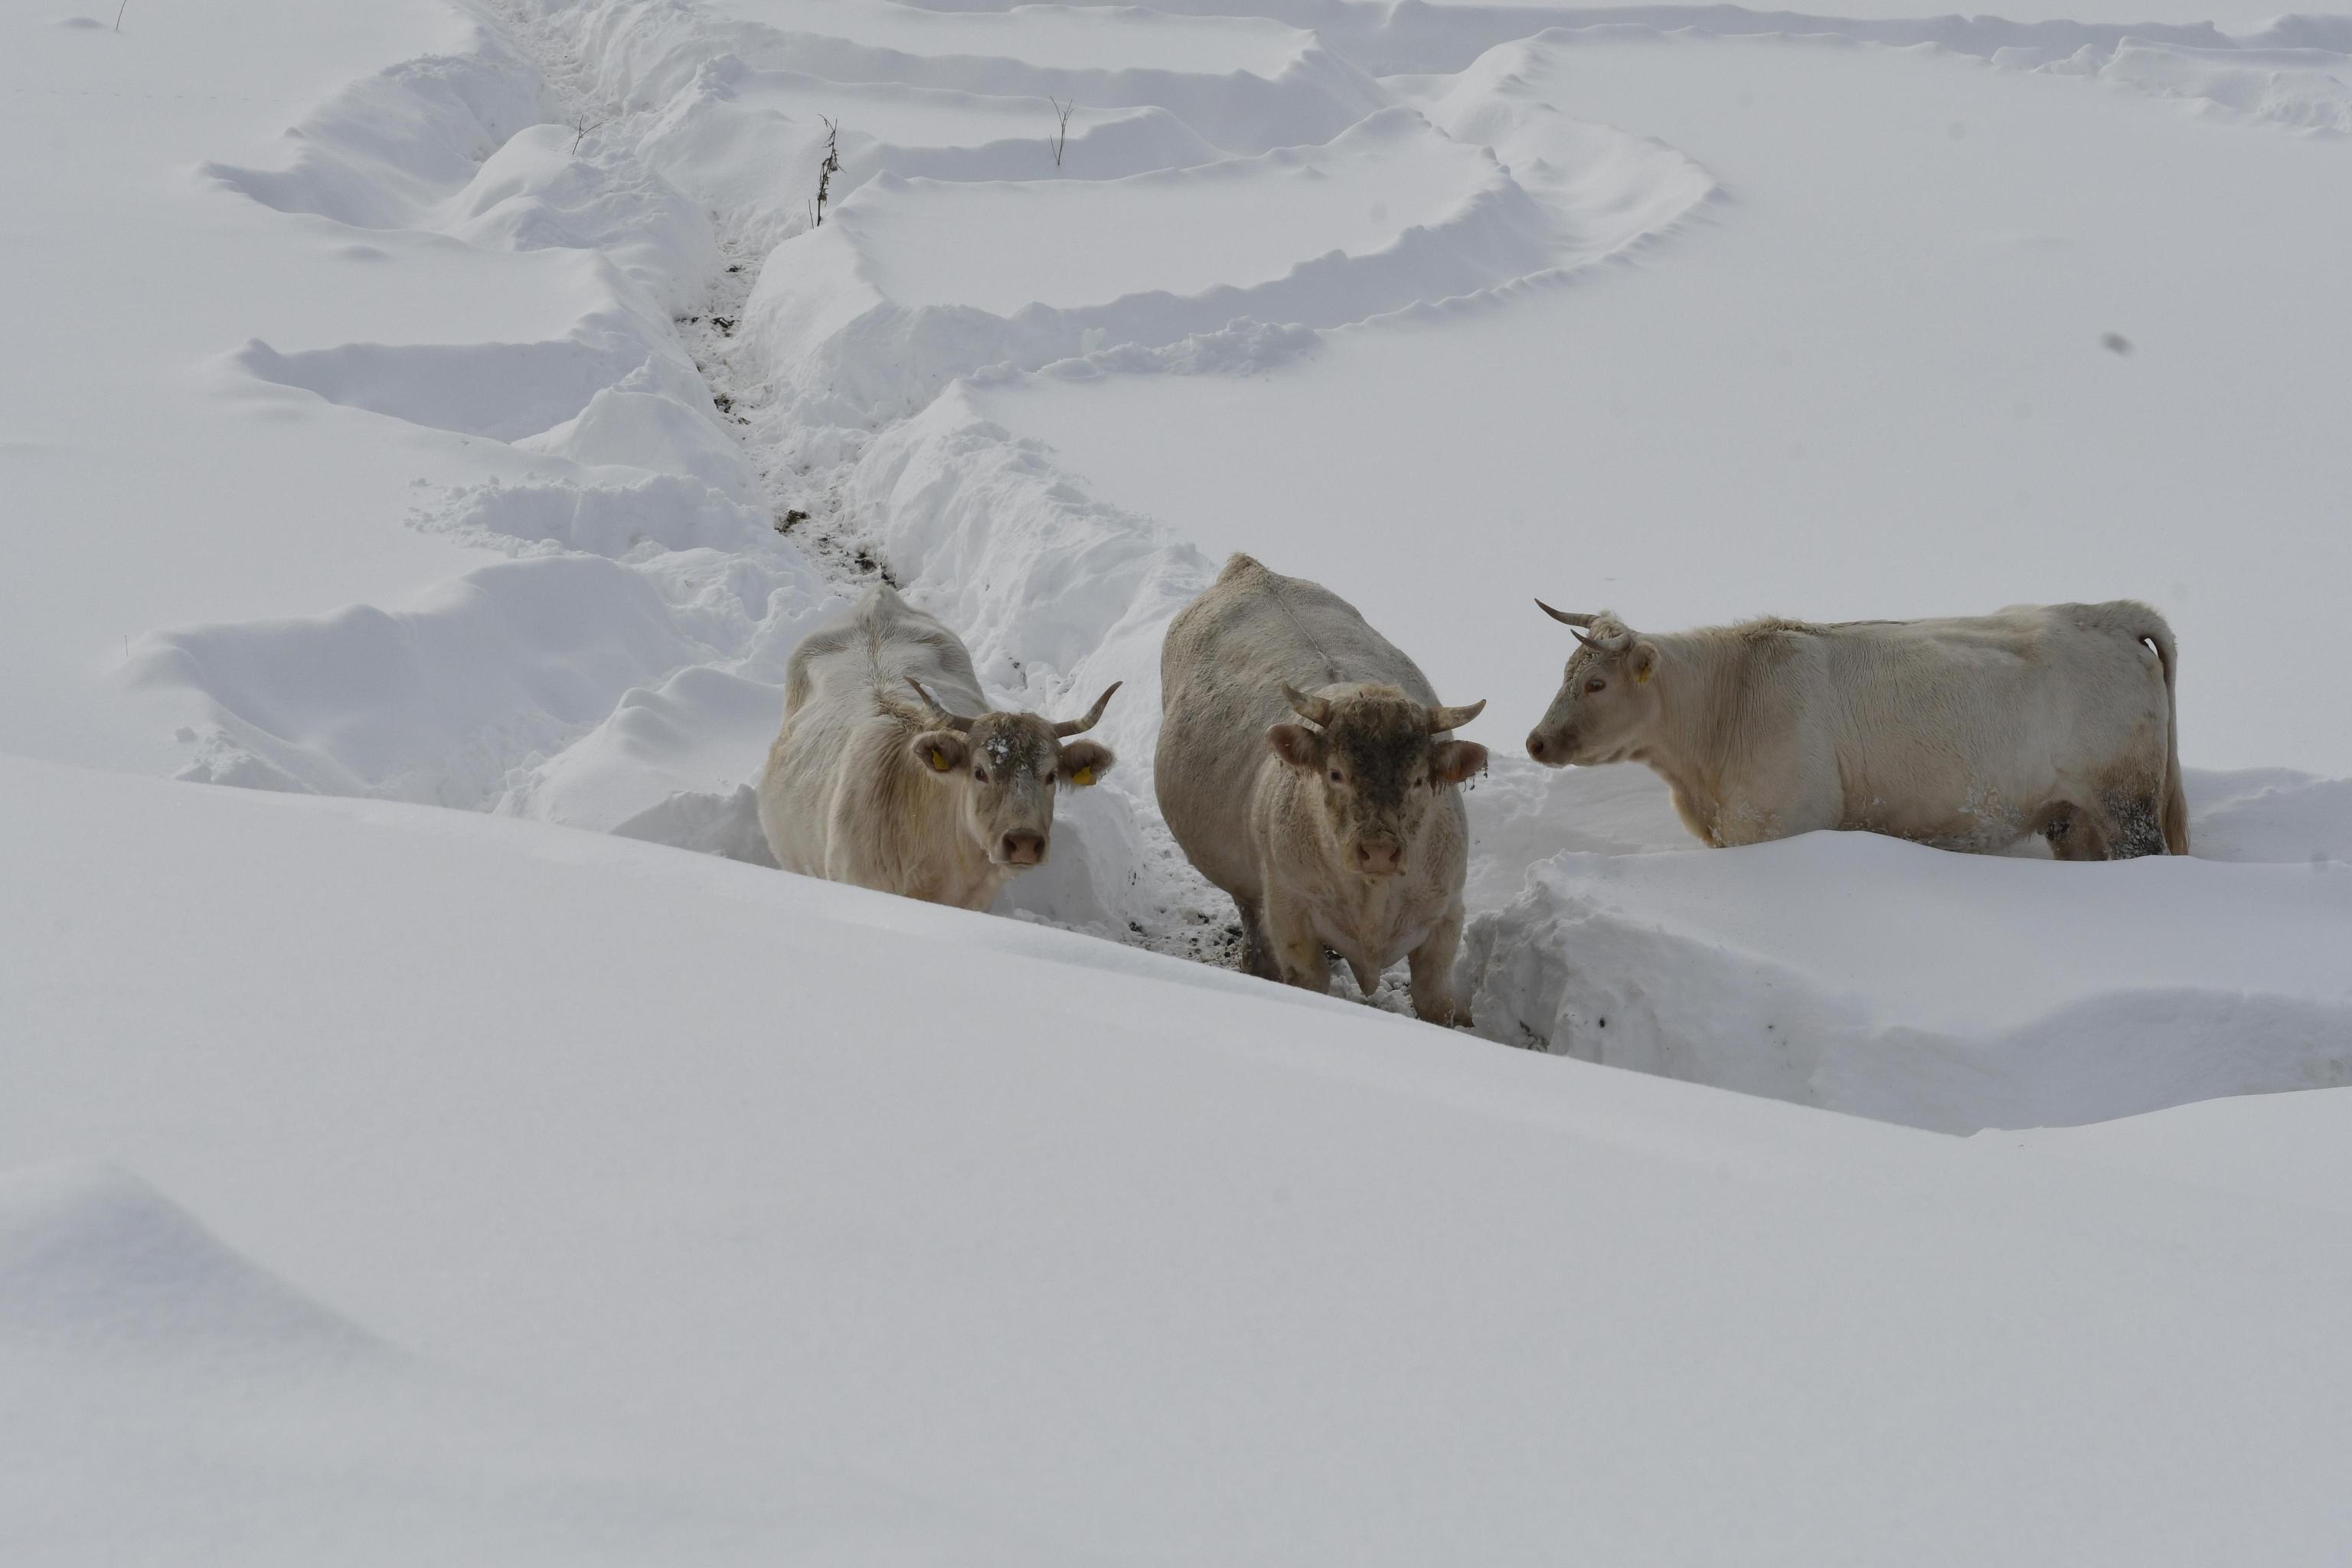 Cattle amid snow in Poggio Cancelli, a hamlet of Campotosto, (L'Aquila, Abruzzo region), after a series of earthquakes in central Italy, 19 January 2017. Around 150 residents from Campotosto were forced to leave their homes and take refuge in rooms on higher ground while awaiting help. According to an Italian mountain rescue team, several people have also been killed in an avalanche that has hit a hotel near the Gran Sasso mountain in same region. ANSA/ CLAUDIO LATTANZIO